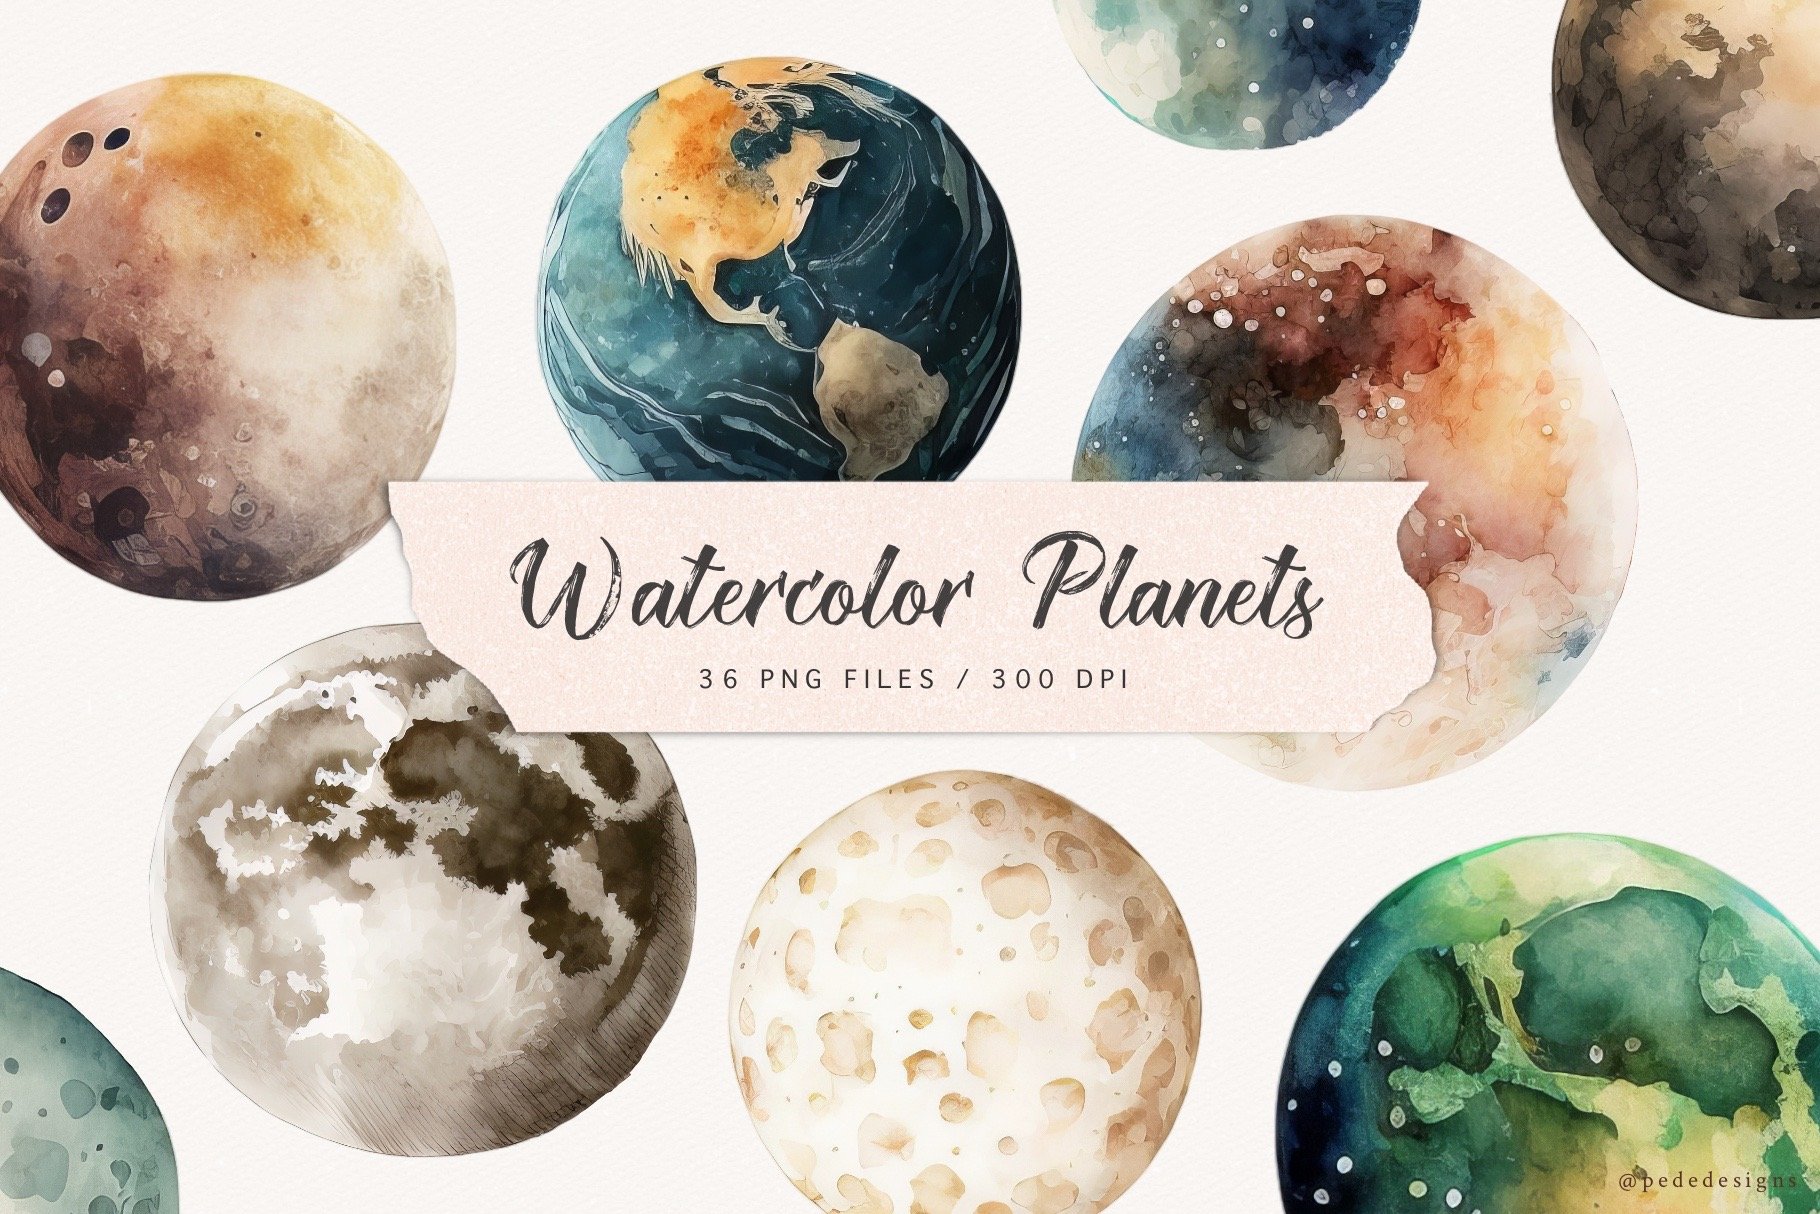 Watercolor Planets cover image.